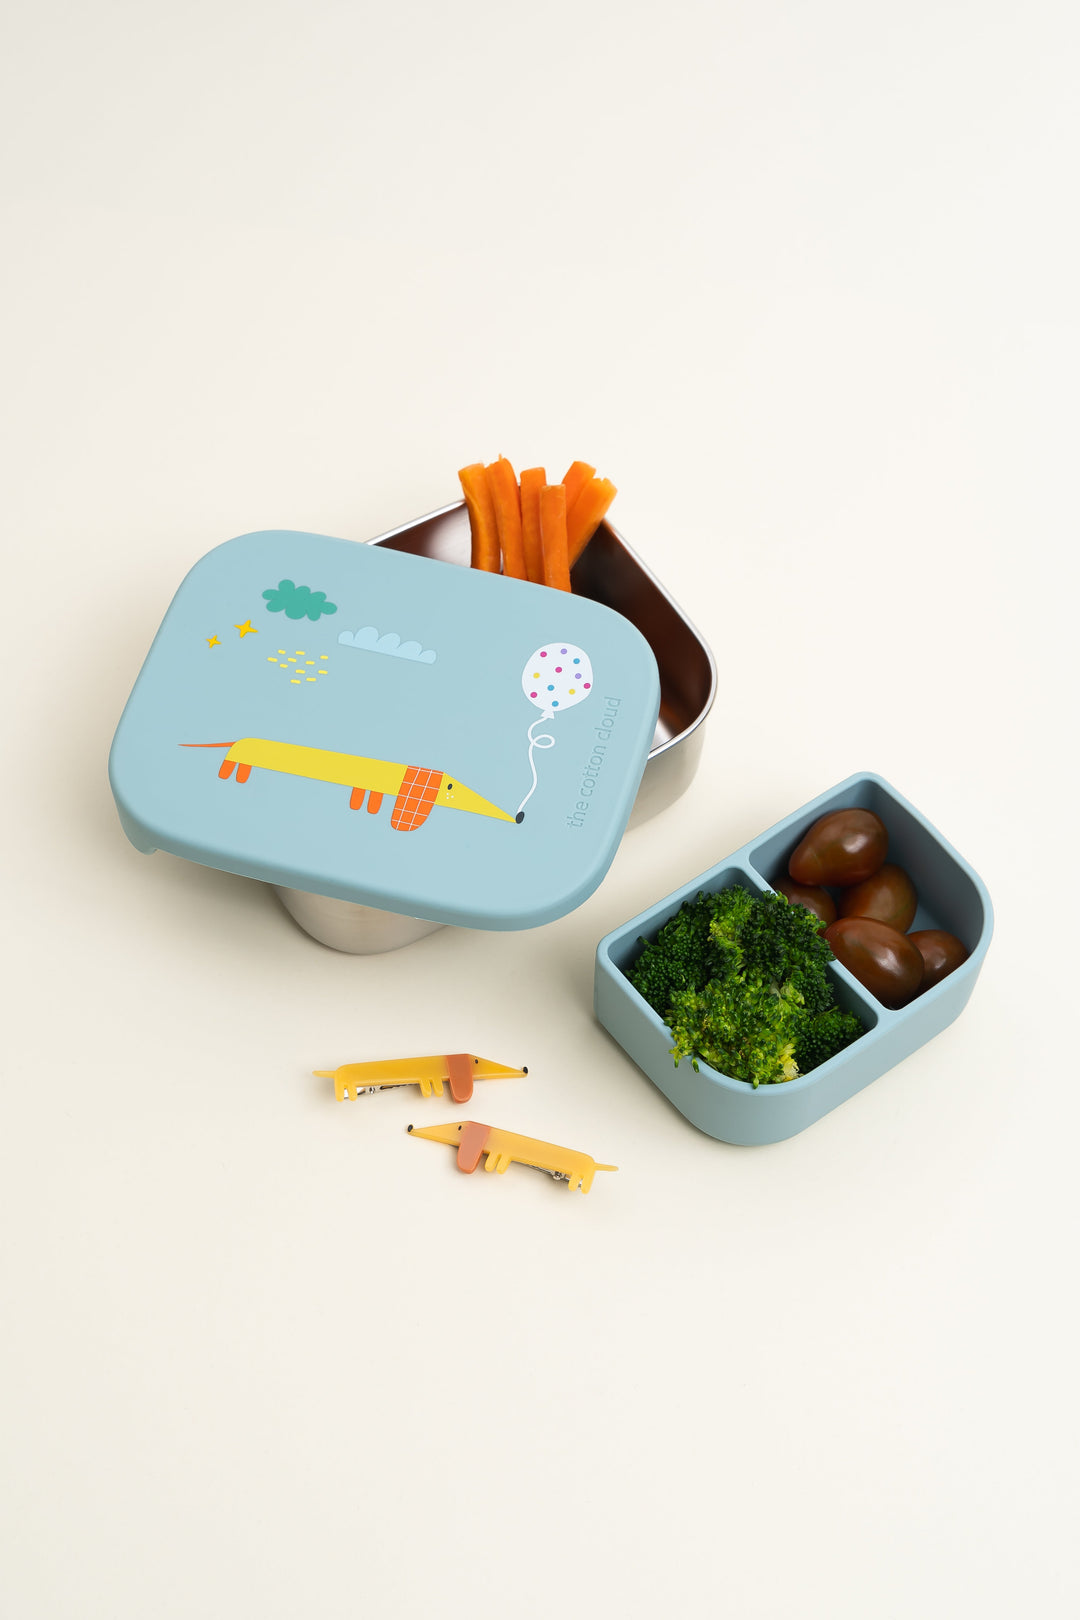 Fruity stainless steel lunch box with removable compartments